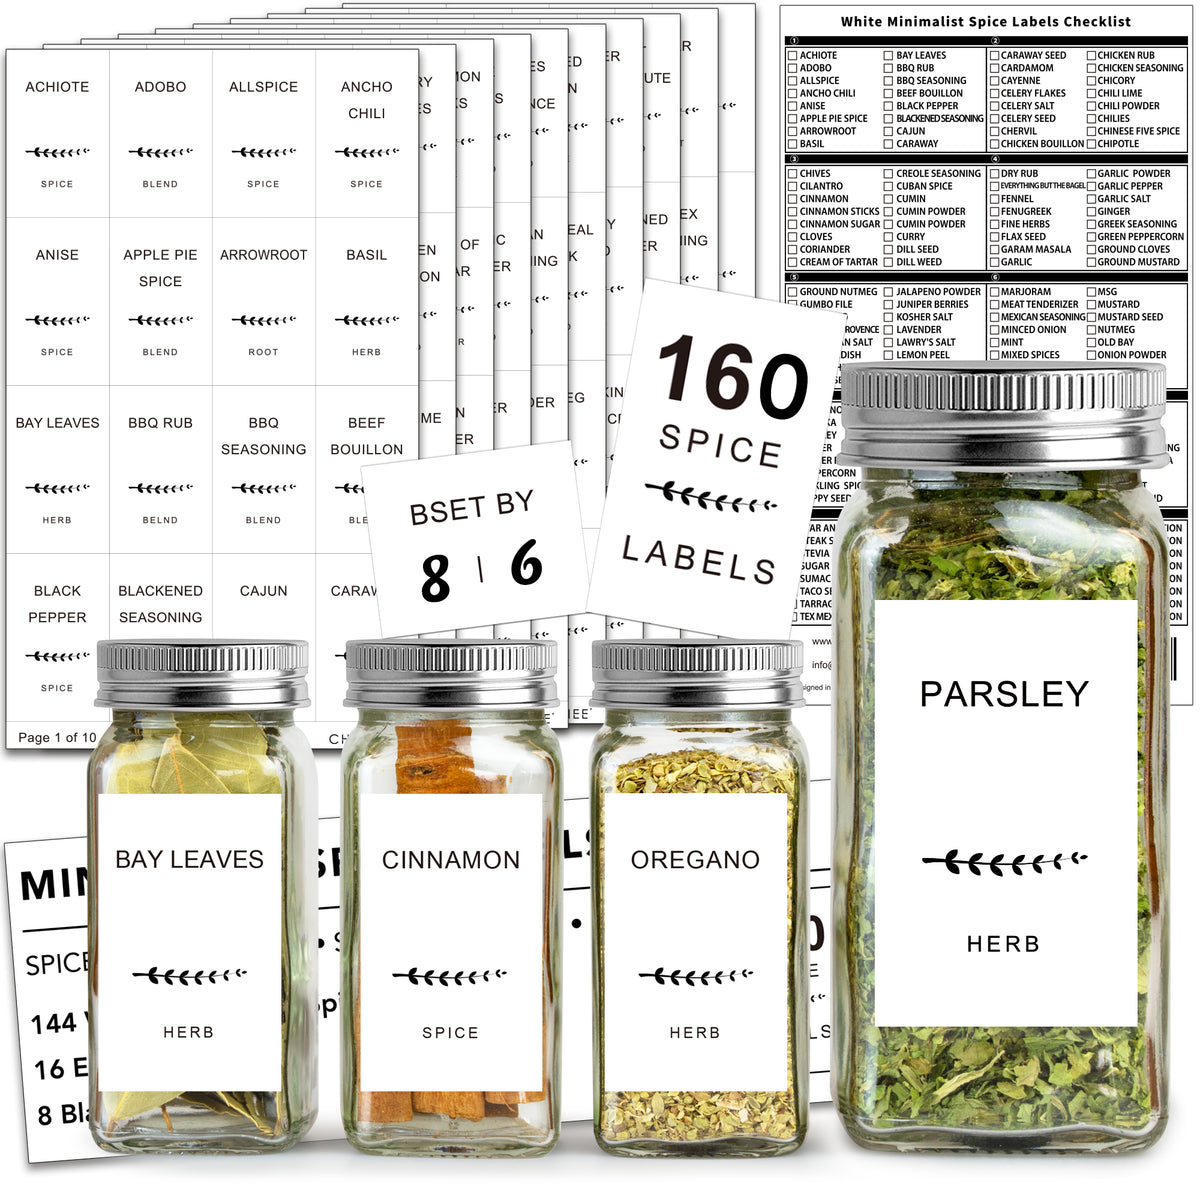 216Pcs Dream Lifestyle Minimalist Spice Jar Labels, Spice Herb Seasoning  Preprinted Labels Stickers, Black Text on White Waterproof Label, Fits for Spice  Jars Containers 